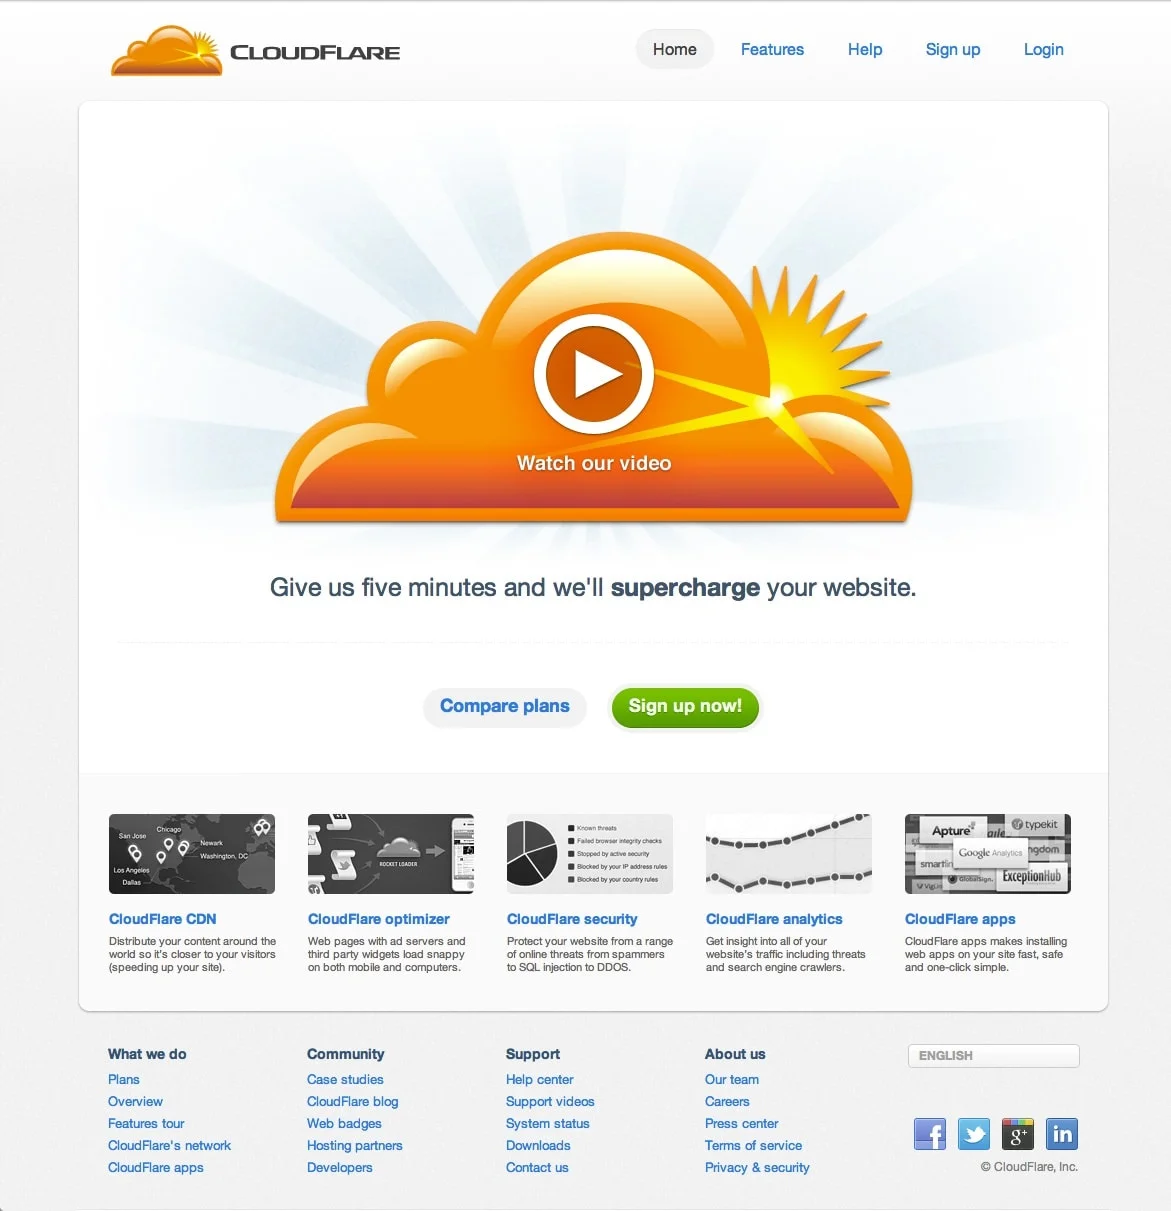 CloudFlare – Supercharge your website in five minutes?